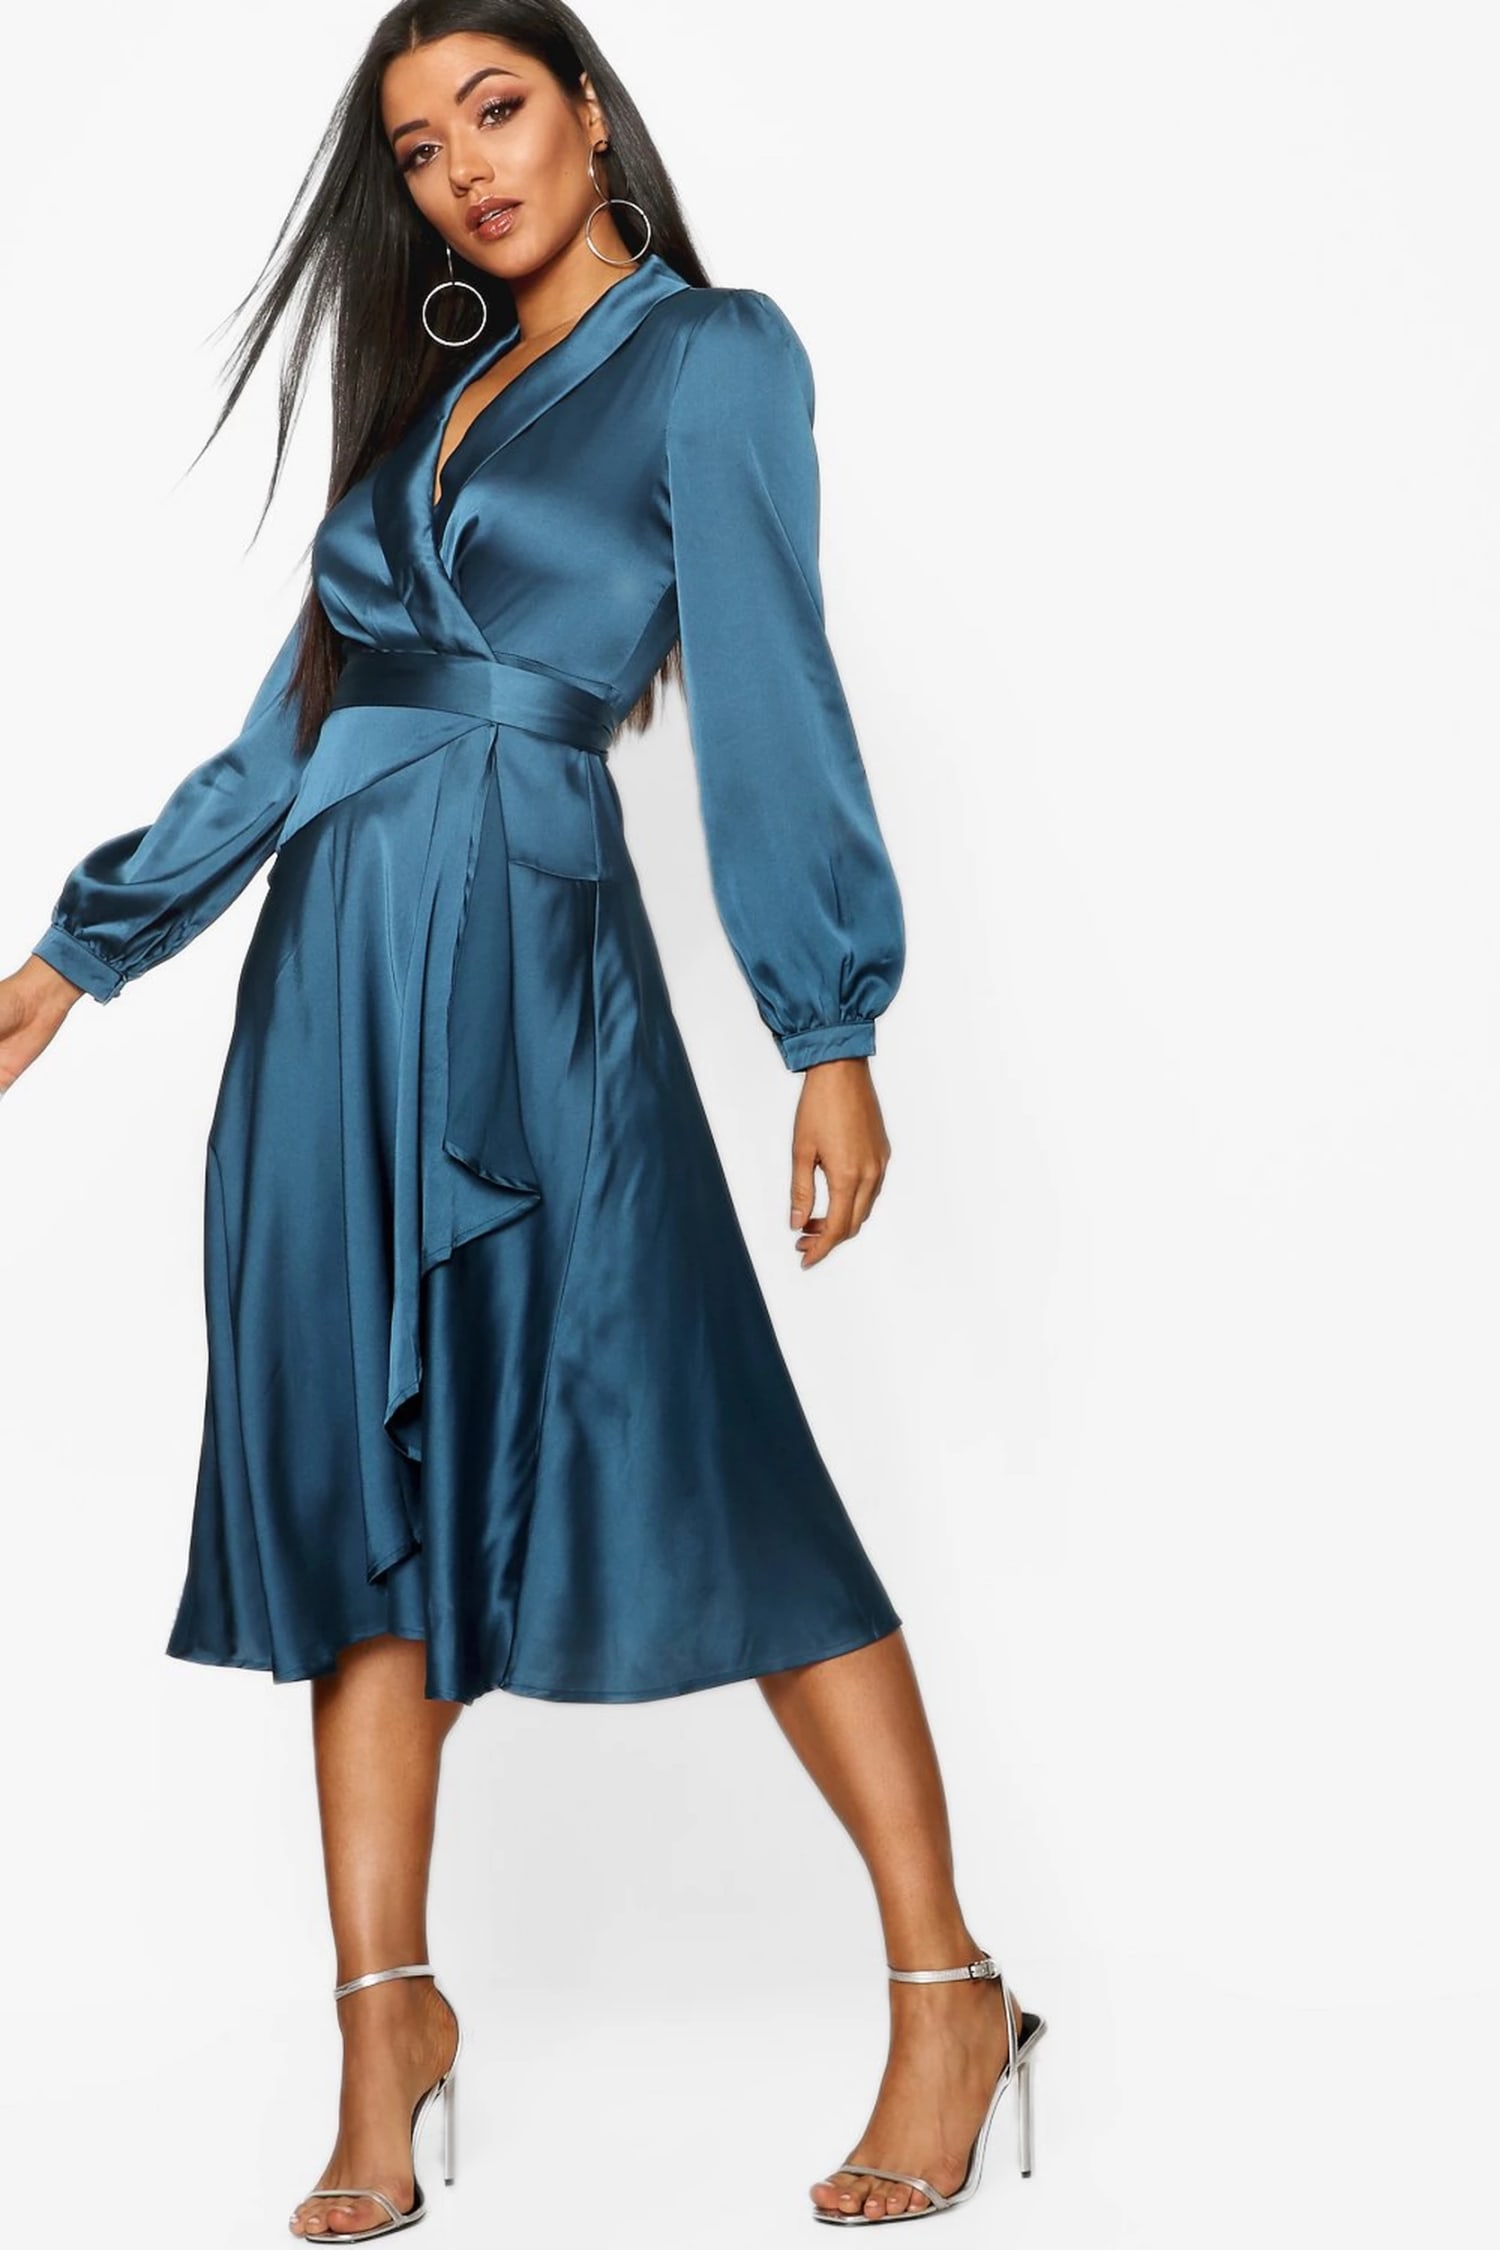 16 winter wedding guest dresses that are stylish for 2022